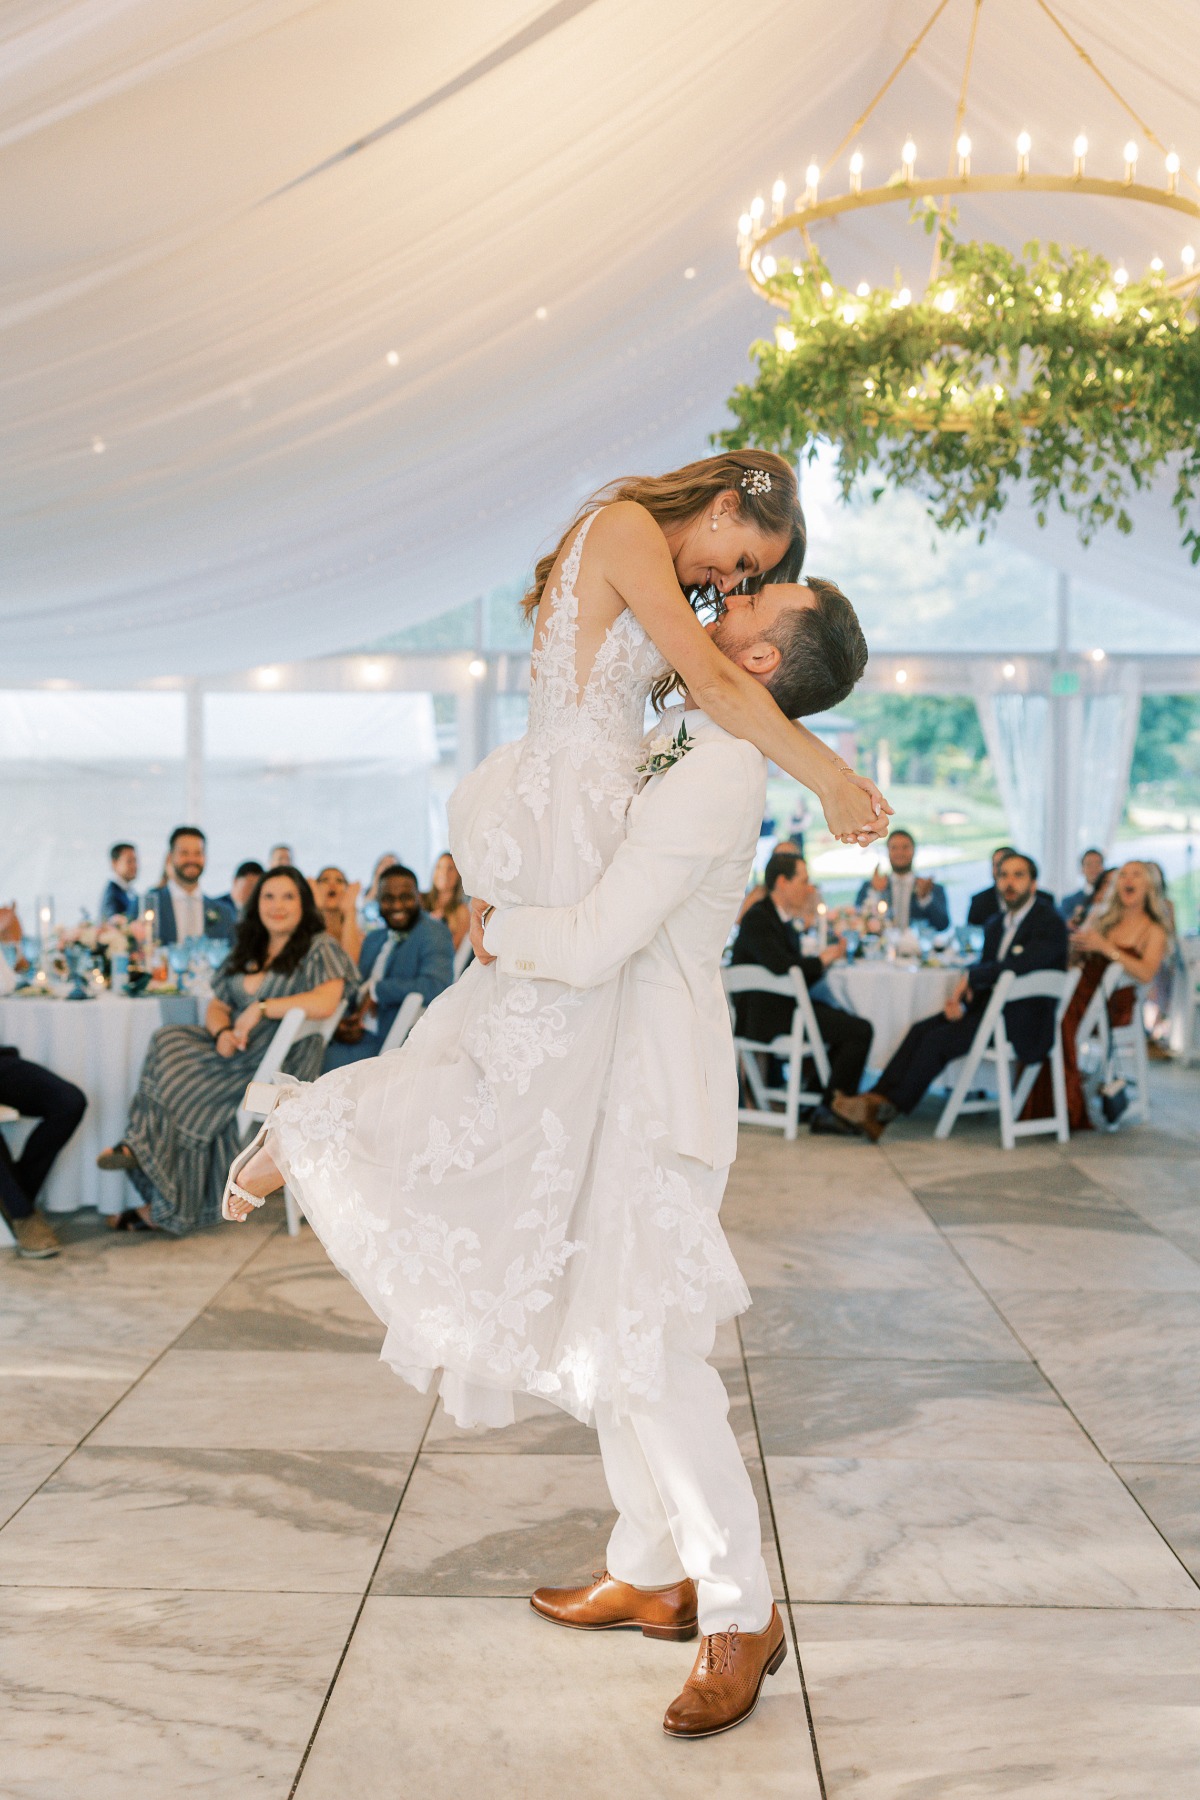 Romantic first dance at tented Vermont wedding reception 